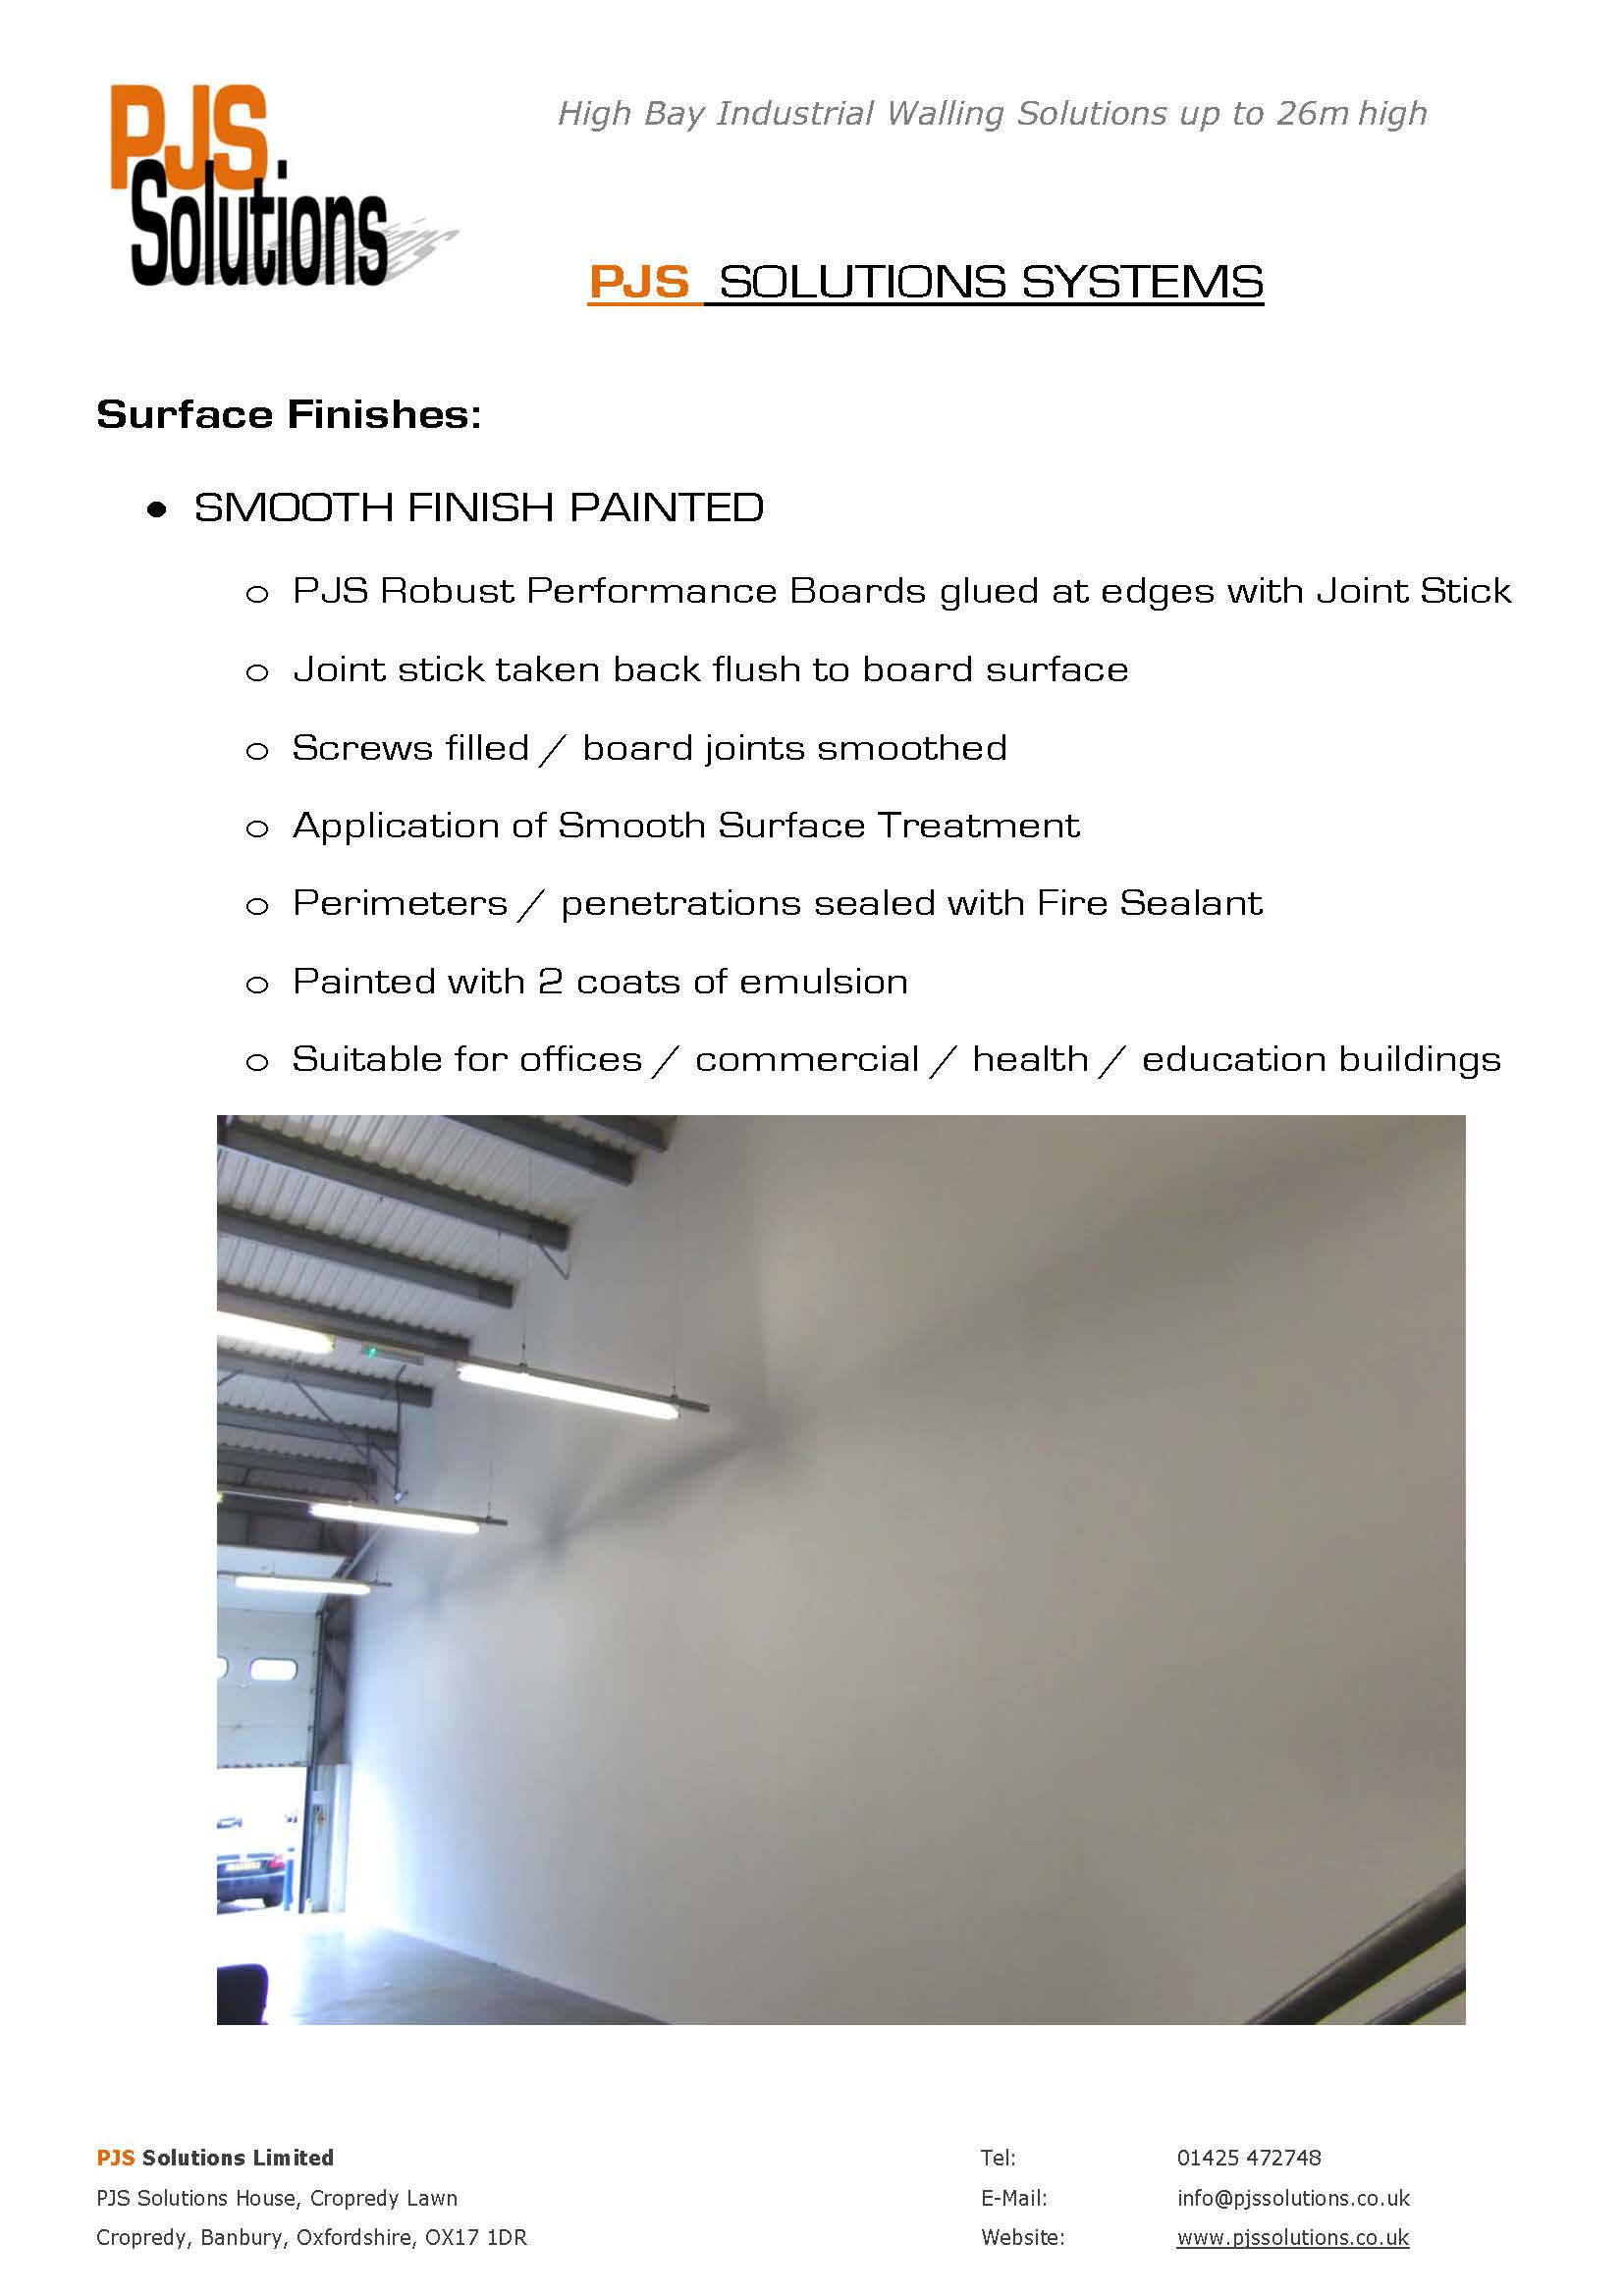 PJS SOLUTIONS PARTITION SYSTEMS Surface Finishes - SMOOTH FINISH PAINTED